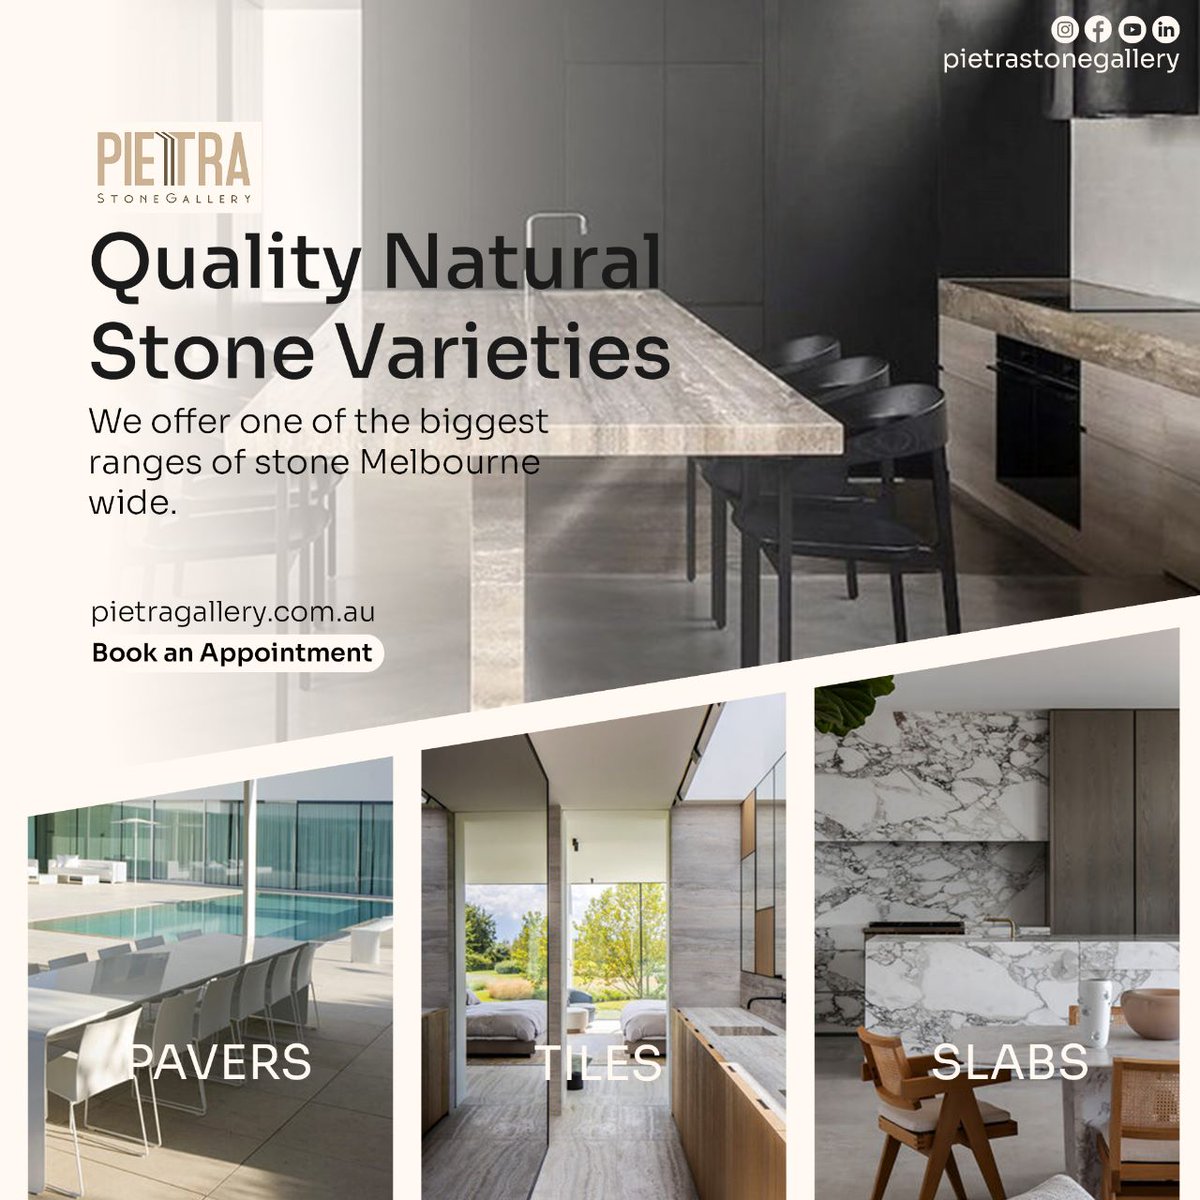 quality natural stone varieties. 
Pietra Stone Gallery Direct importer and supplier of high quality and exclusive natural stone⁣. 

-- pietragallery.com.au

#Pietrastonegallery #marble #slab  #melbournestone #melbourneinterior #melbournearchitecture #melbournekitchens